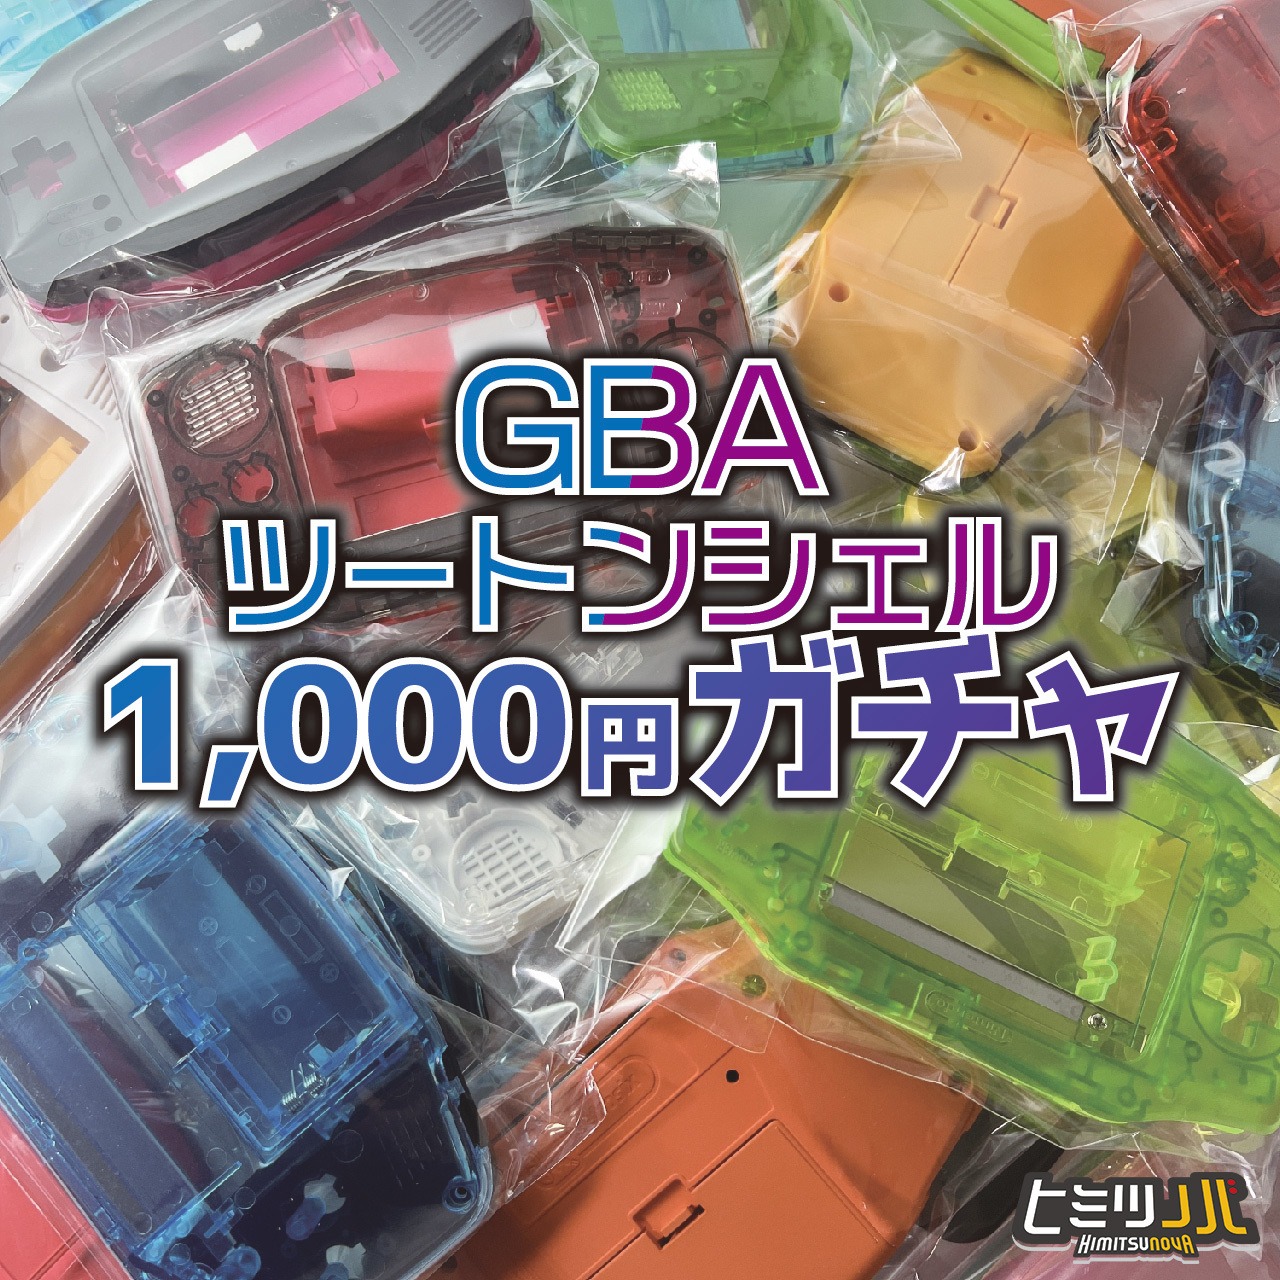 【GBAツートンシェル】1,000円ガチャ